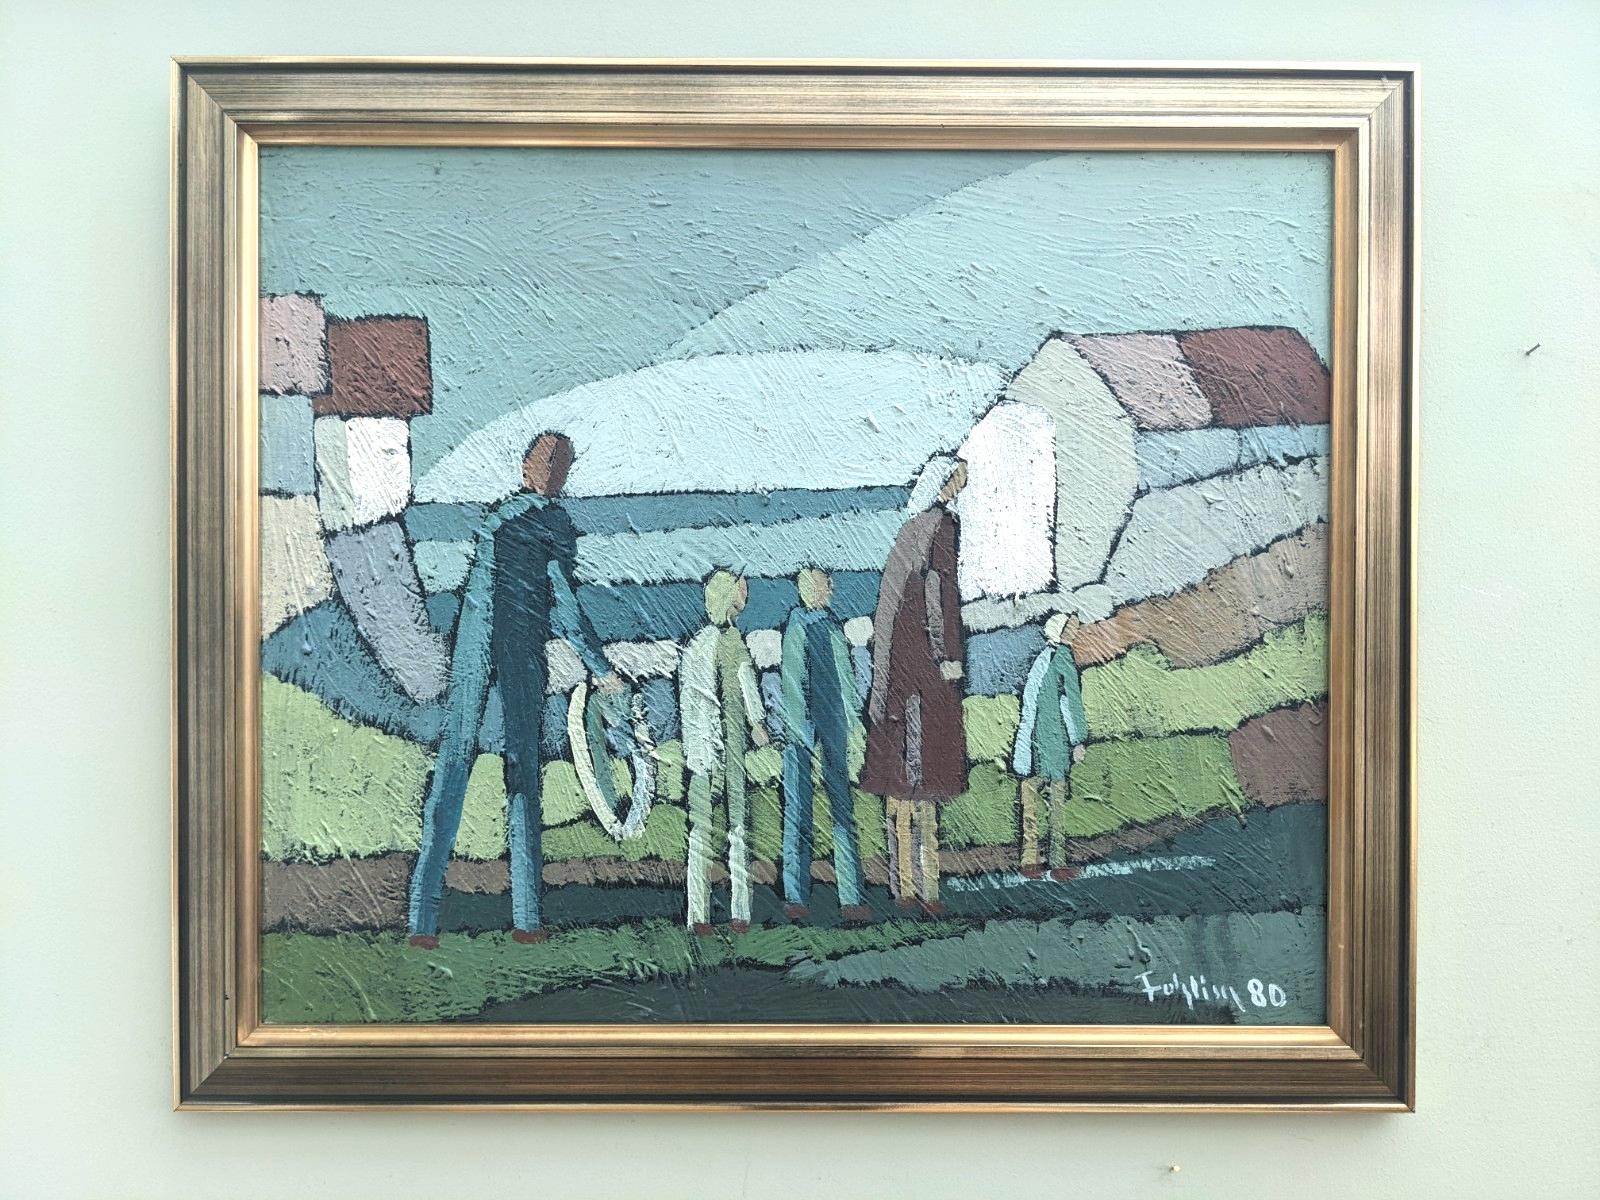 1980 Vintage Swedish Figurative Framed Oil Painting - Family - Gray Figurative Painting by Unknown